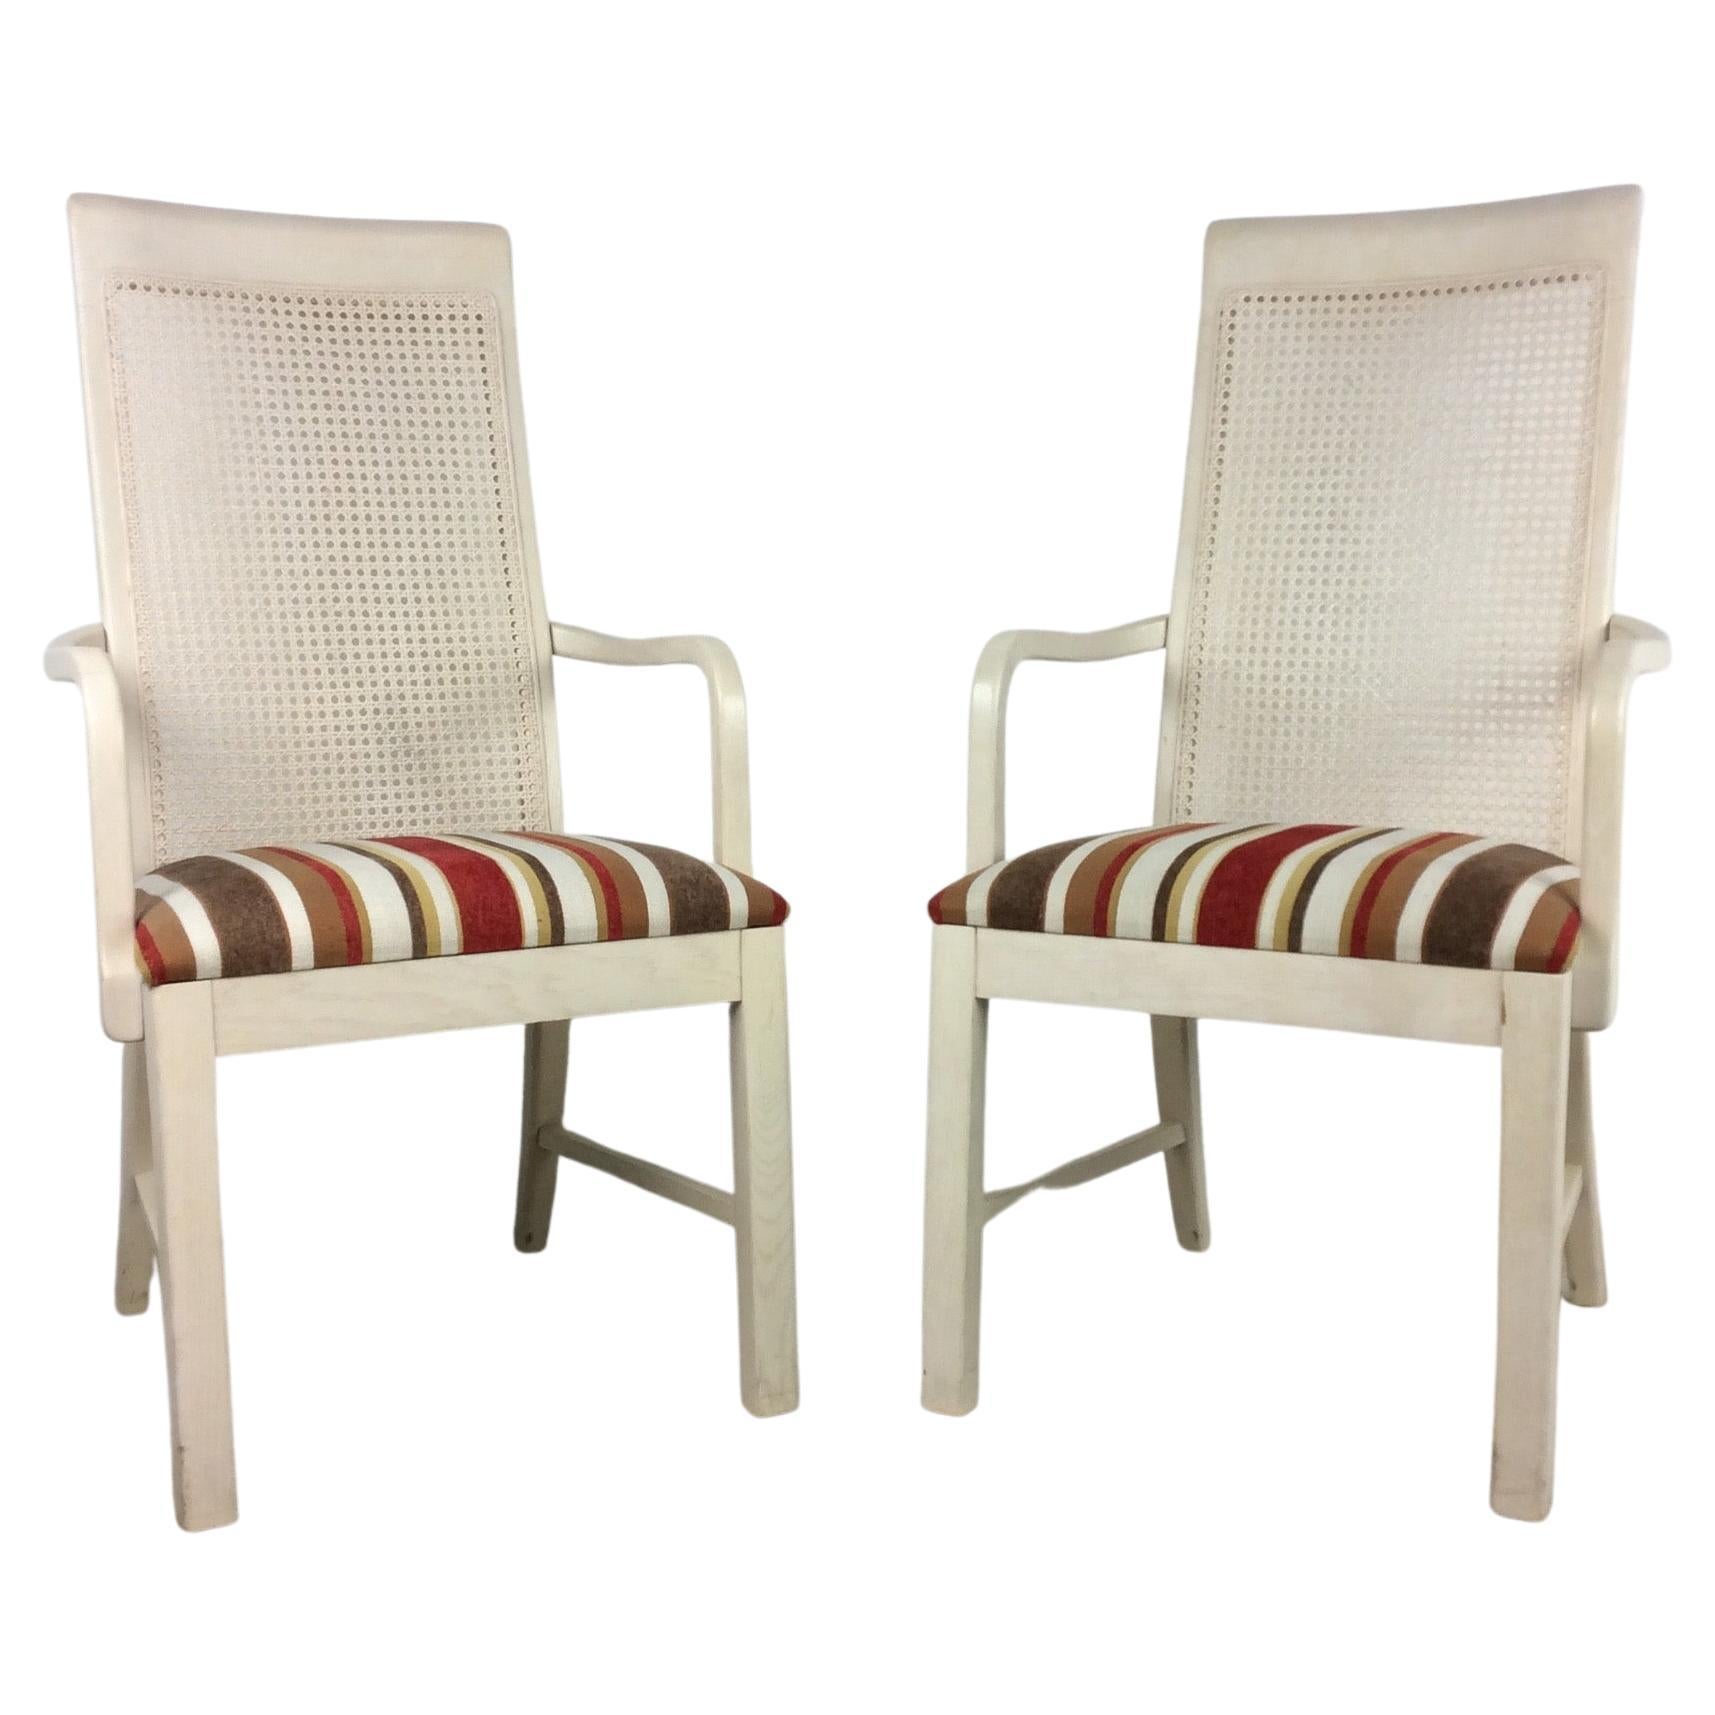 Pair of Hollywood Regency Style White Cane Back Arm Chairs For Sale